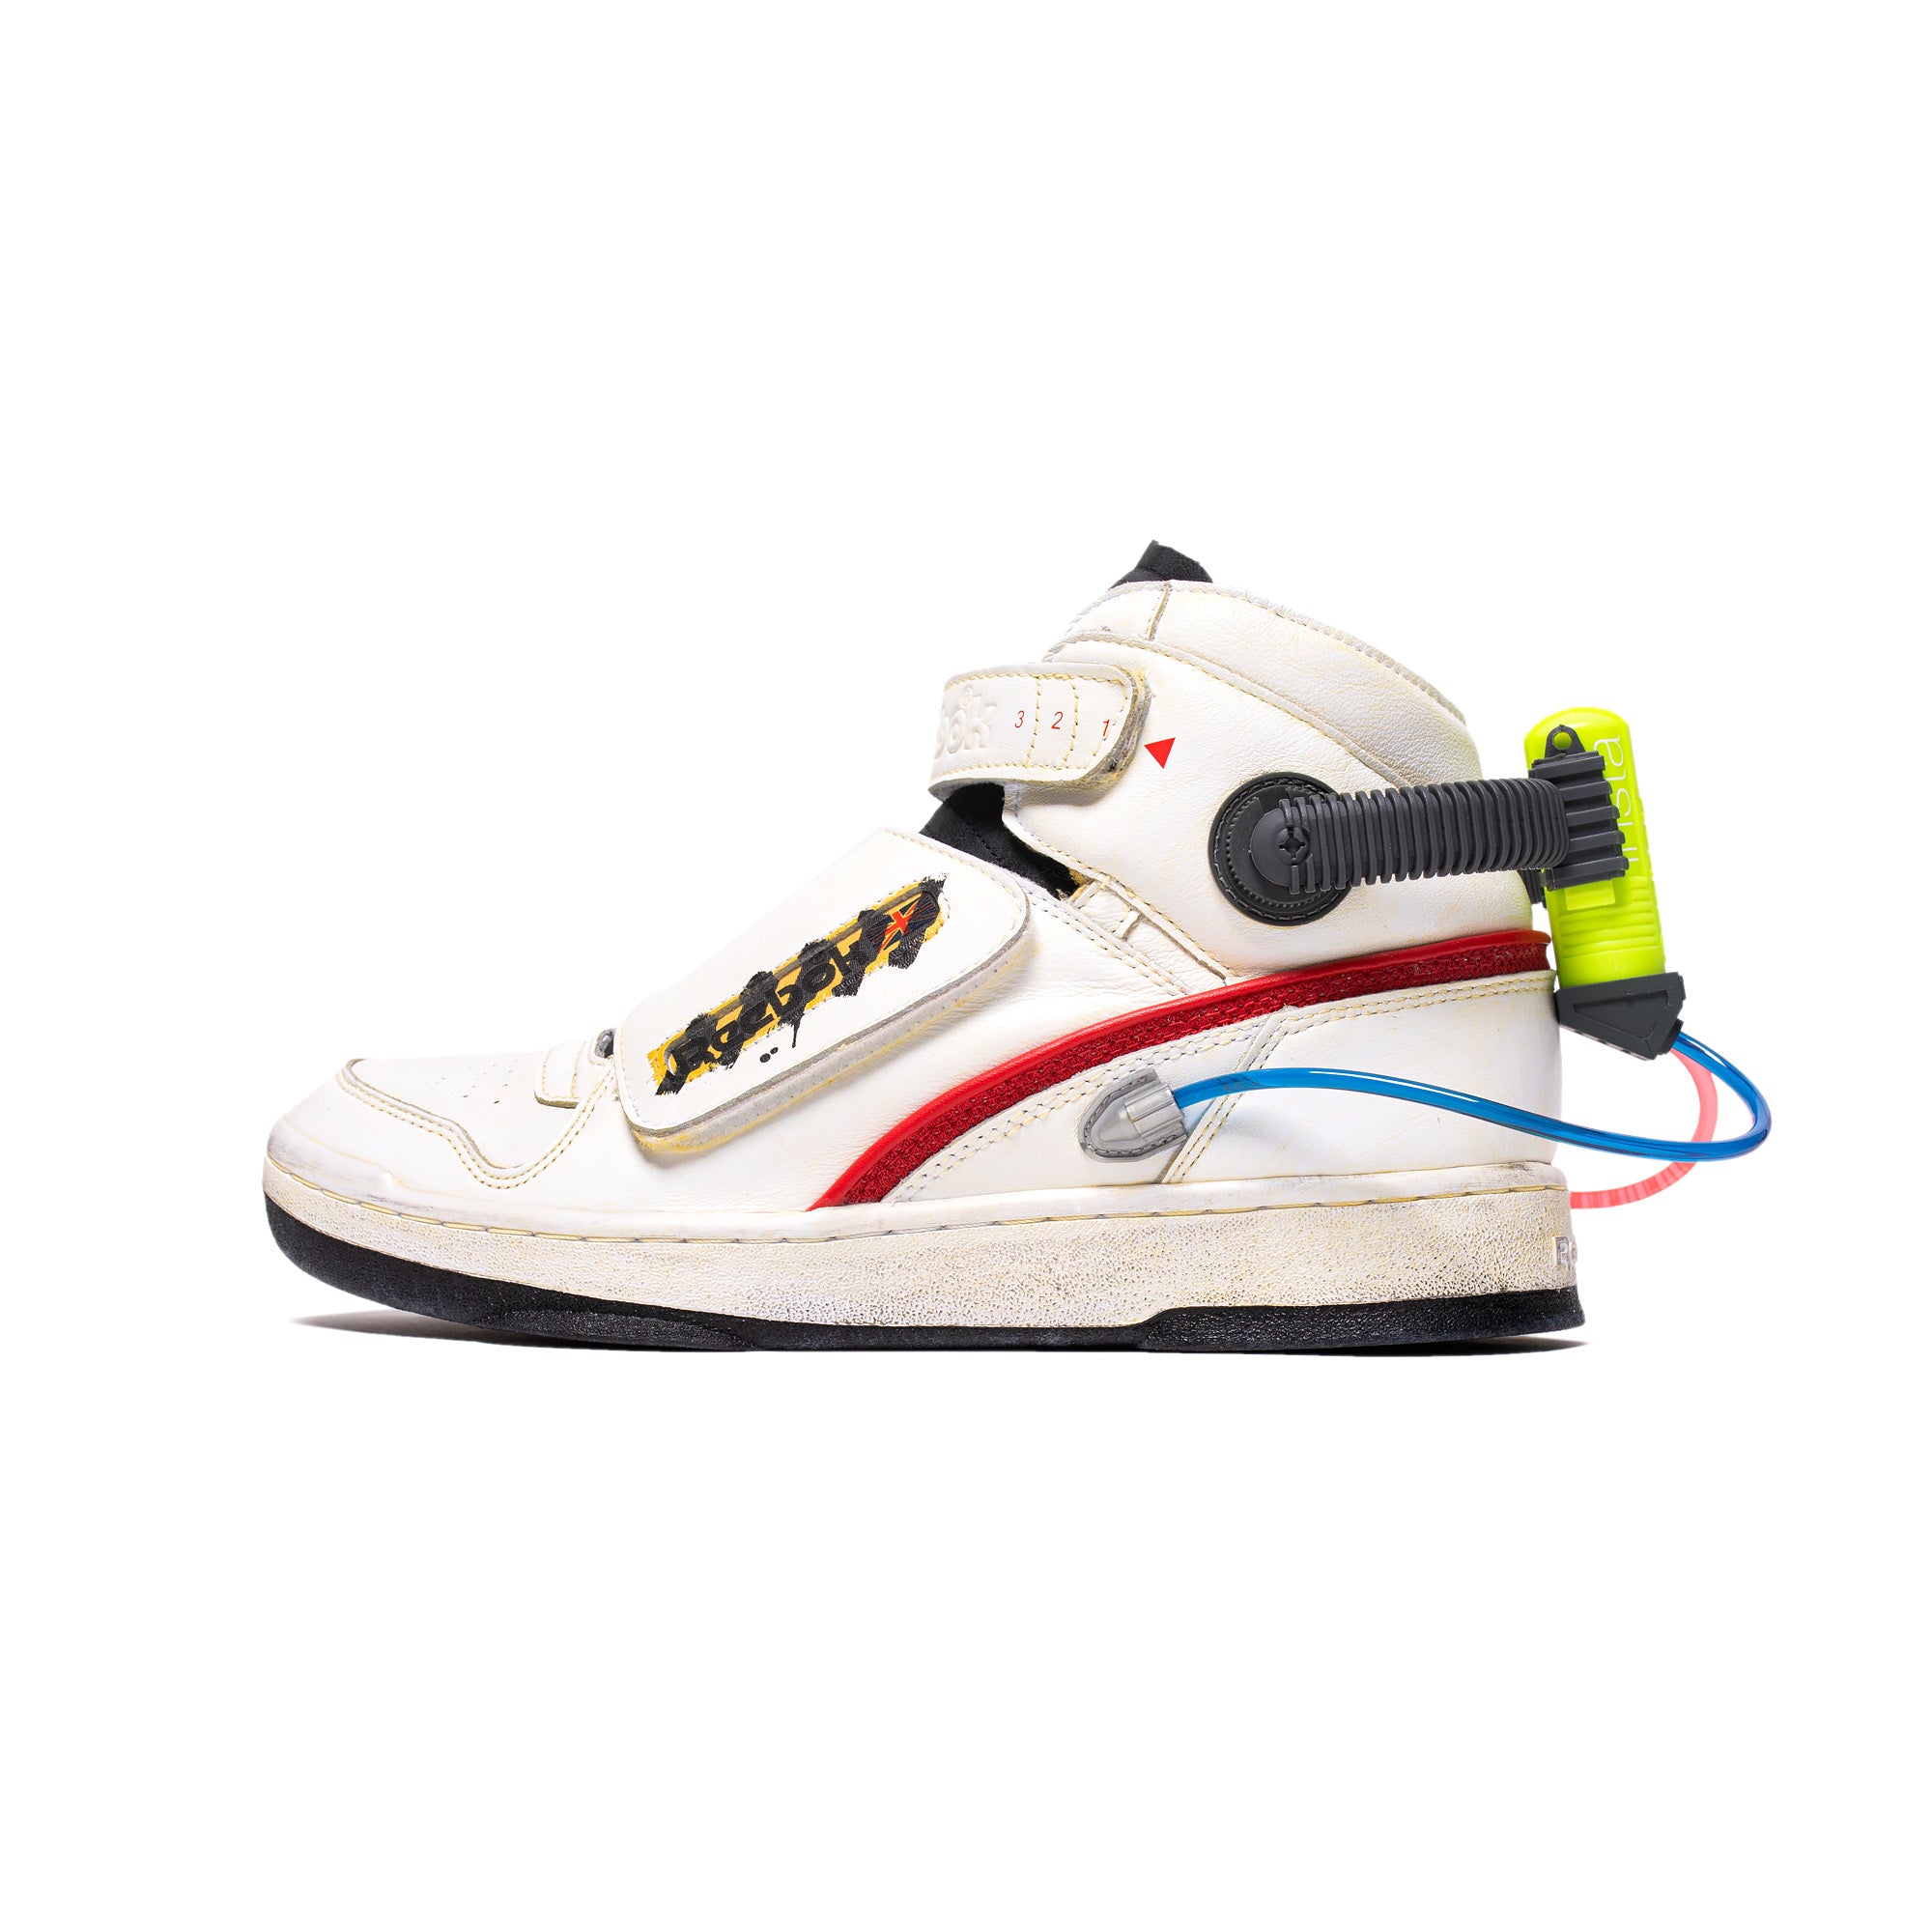 Reebok x Ghostbusters Mens Ghost Smasher Shoes – Extra Butter